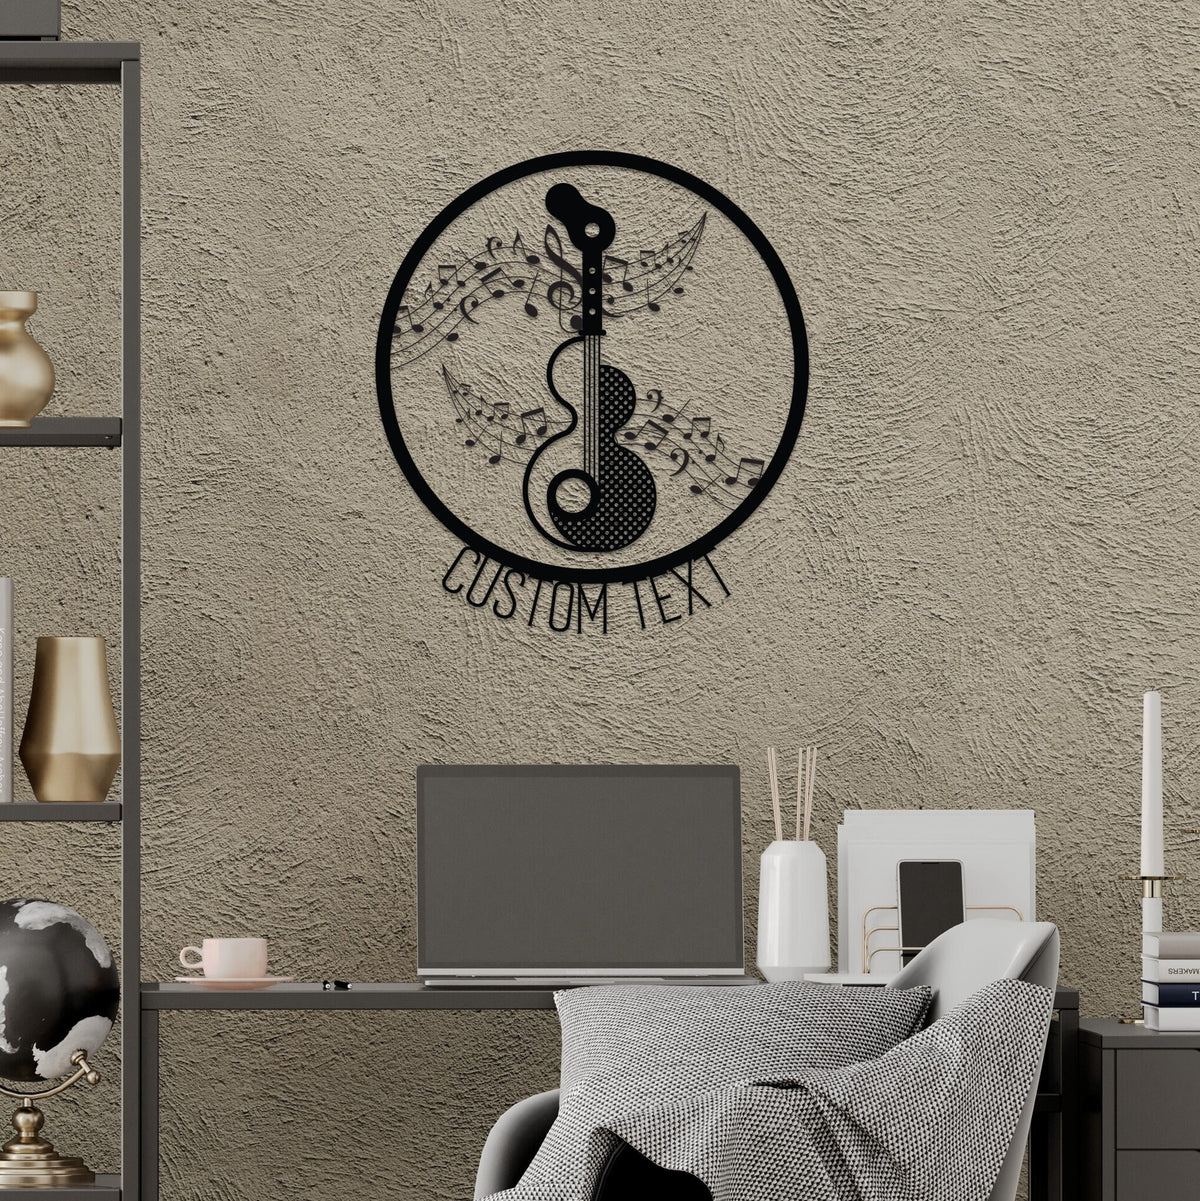 Personalized Guitar Metal Wall Art and Customized Decor Gift for Musician and Guitarist